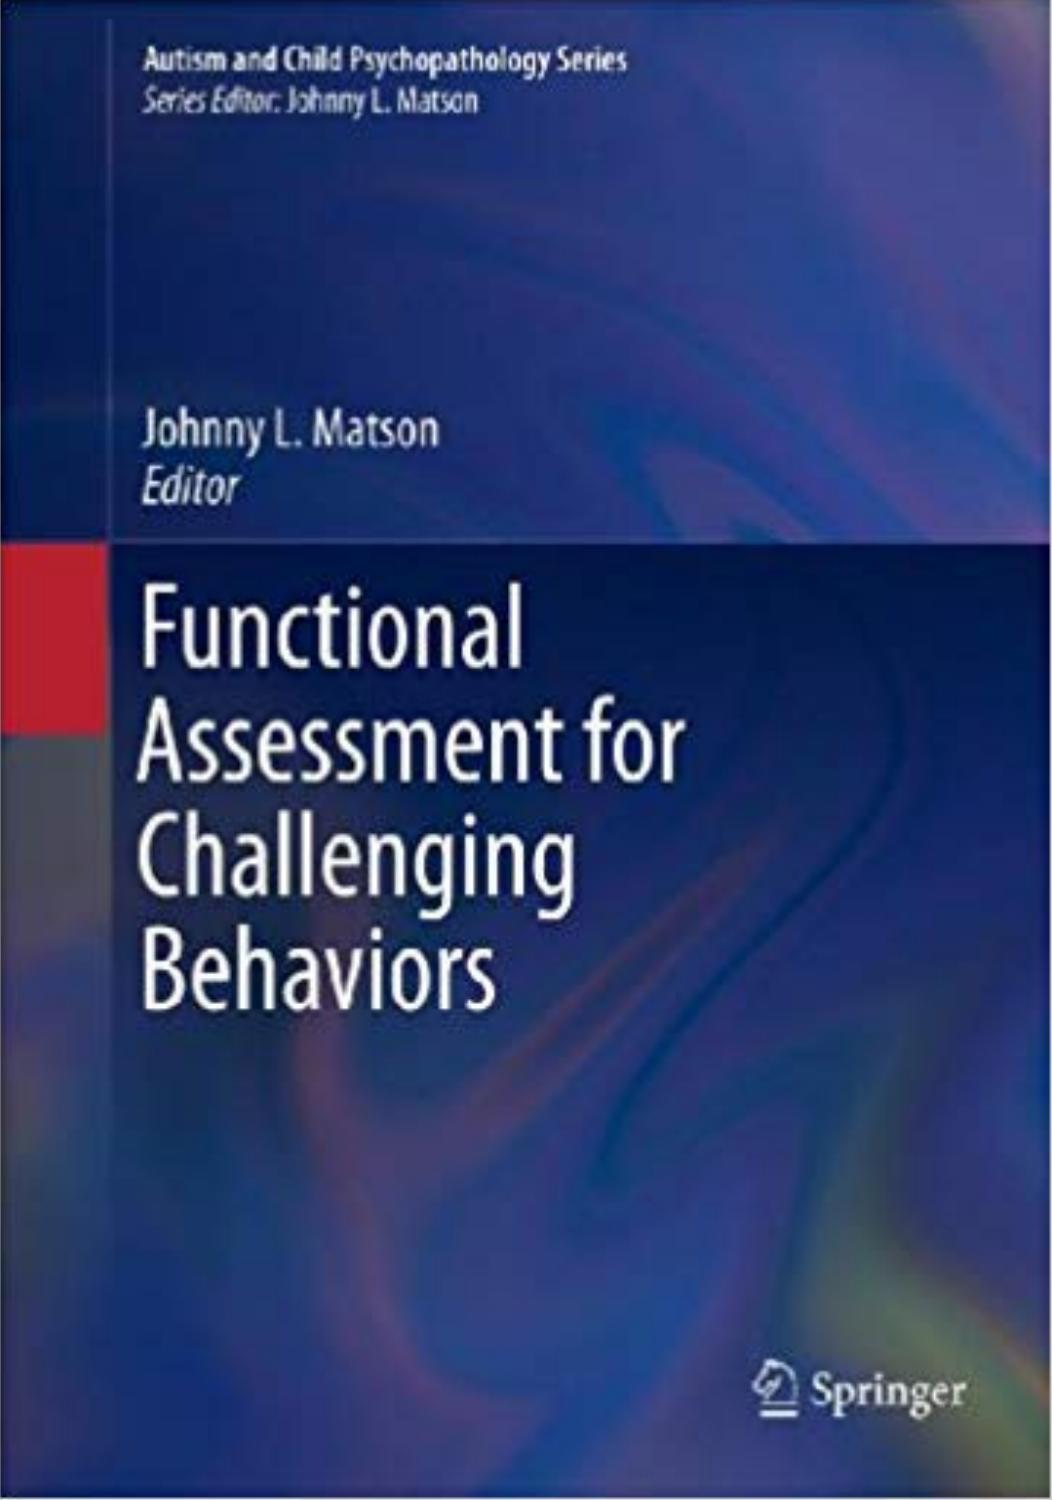 Functional Assessment for Challenging Behaviors by Johnny L. Matson